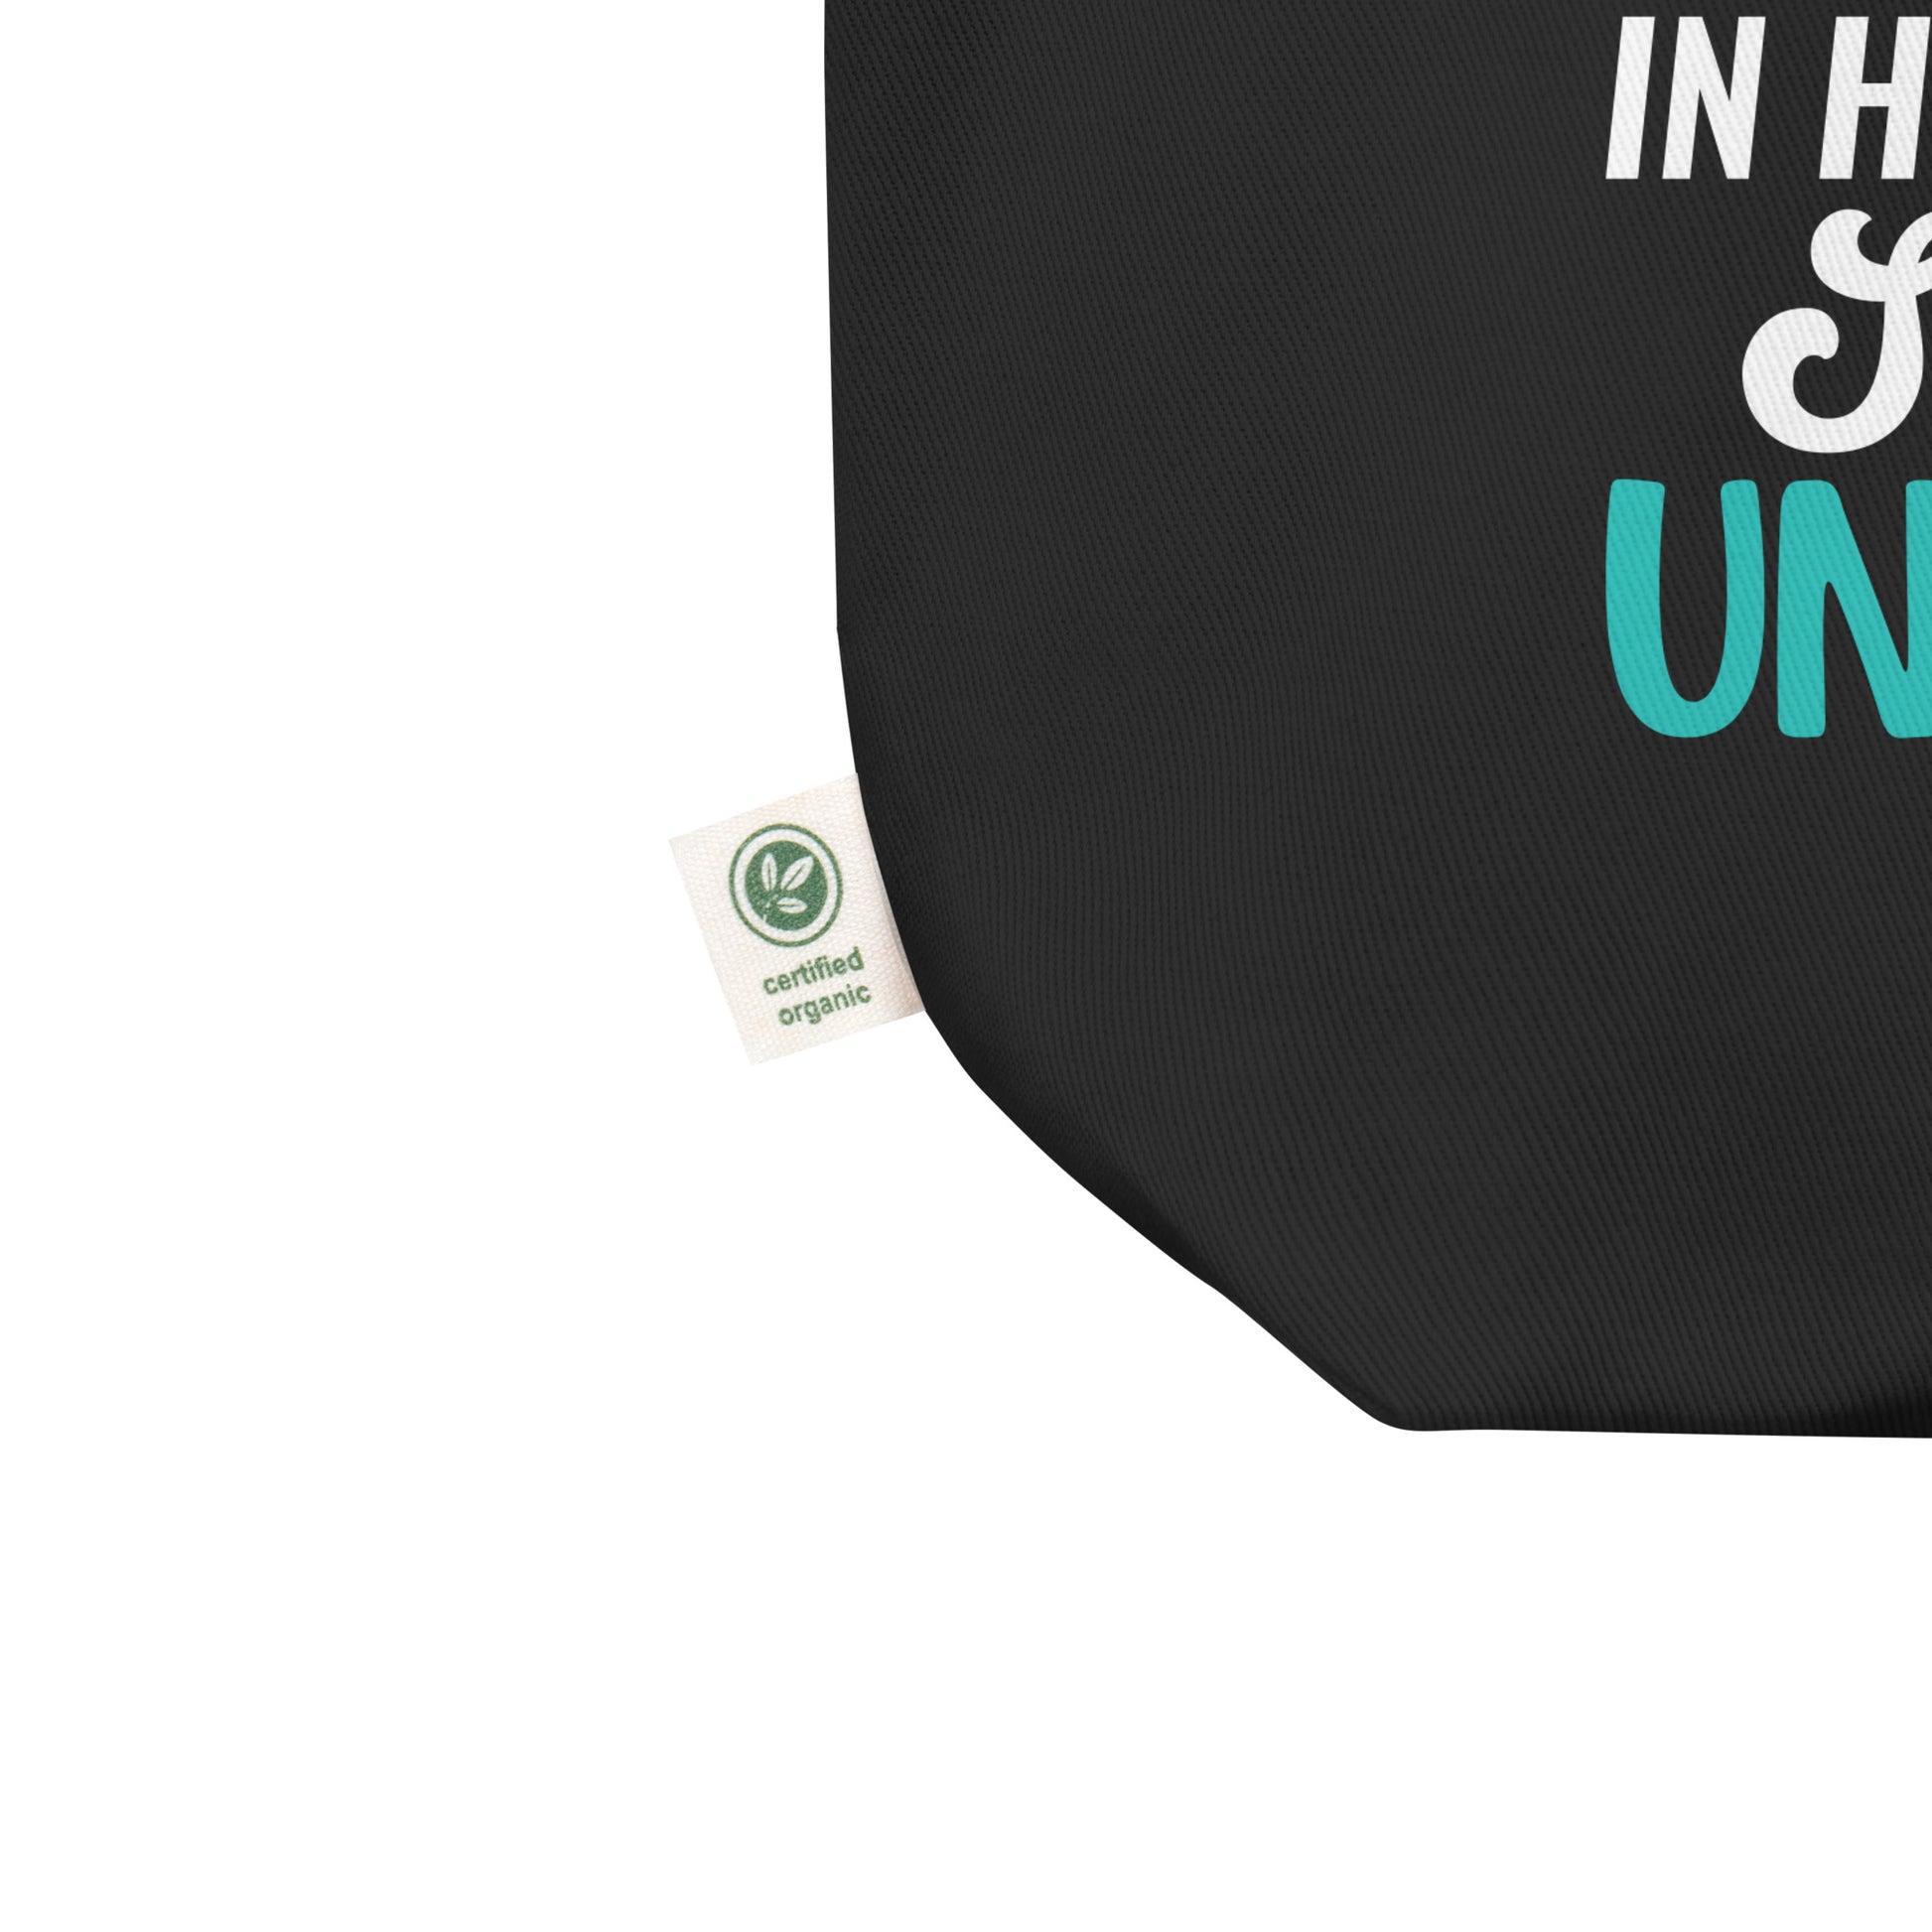 With Jesus in Her Heart & Coffee in Her Cup She is Unstoppable Eco Tote Bag